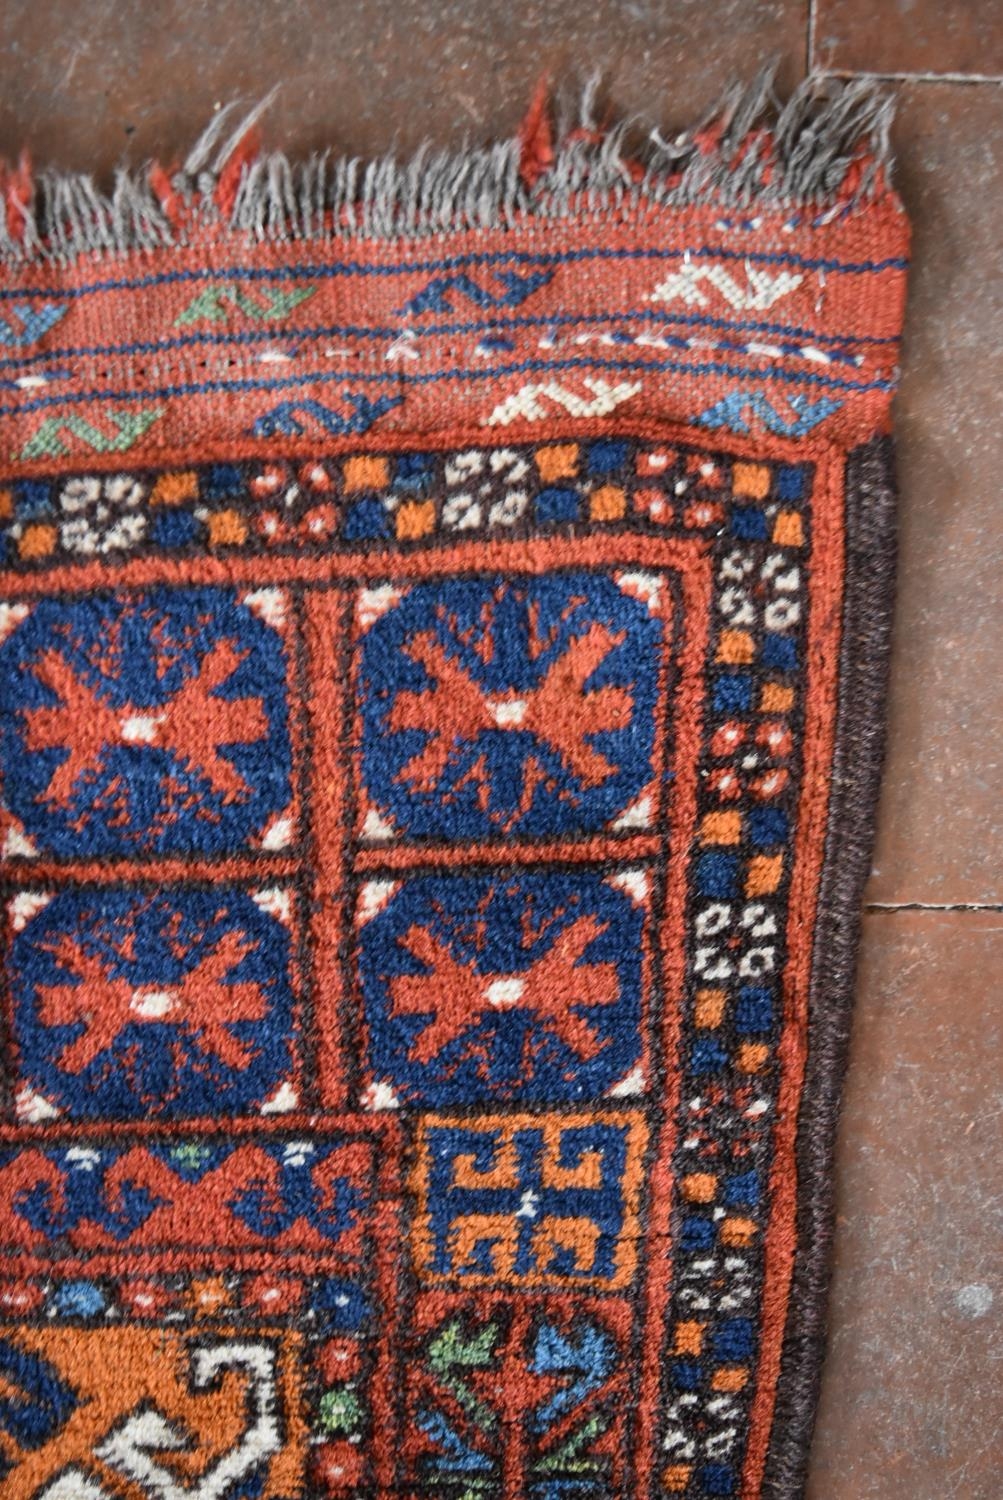 An Afghan rug with geometric design across the madder field within stylised floral borders. L. - Image 3 of 4